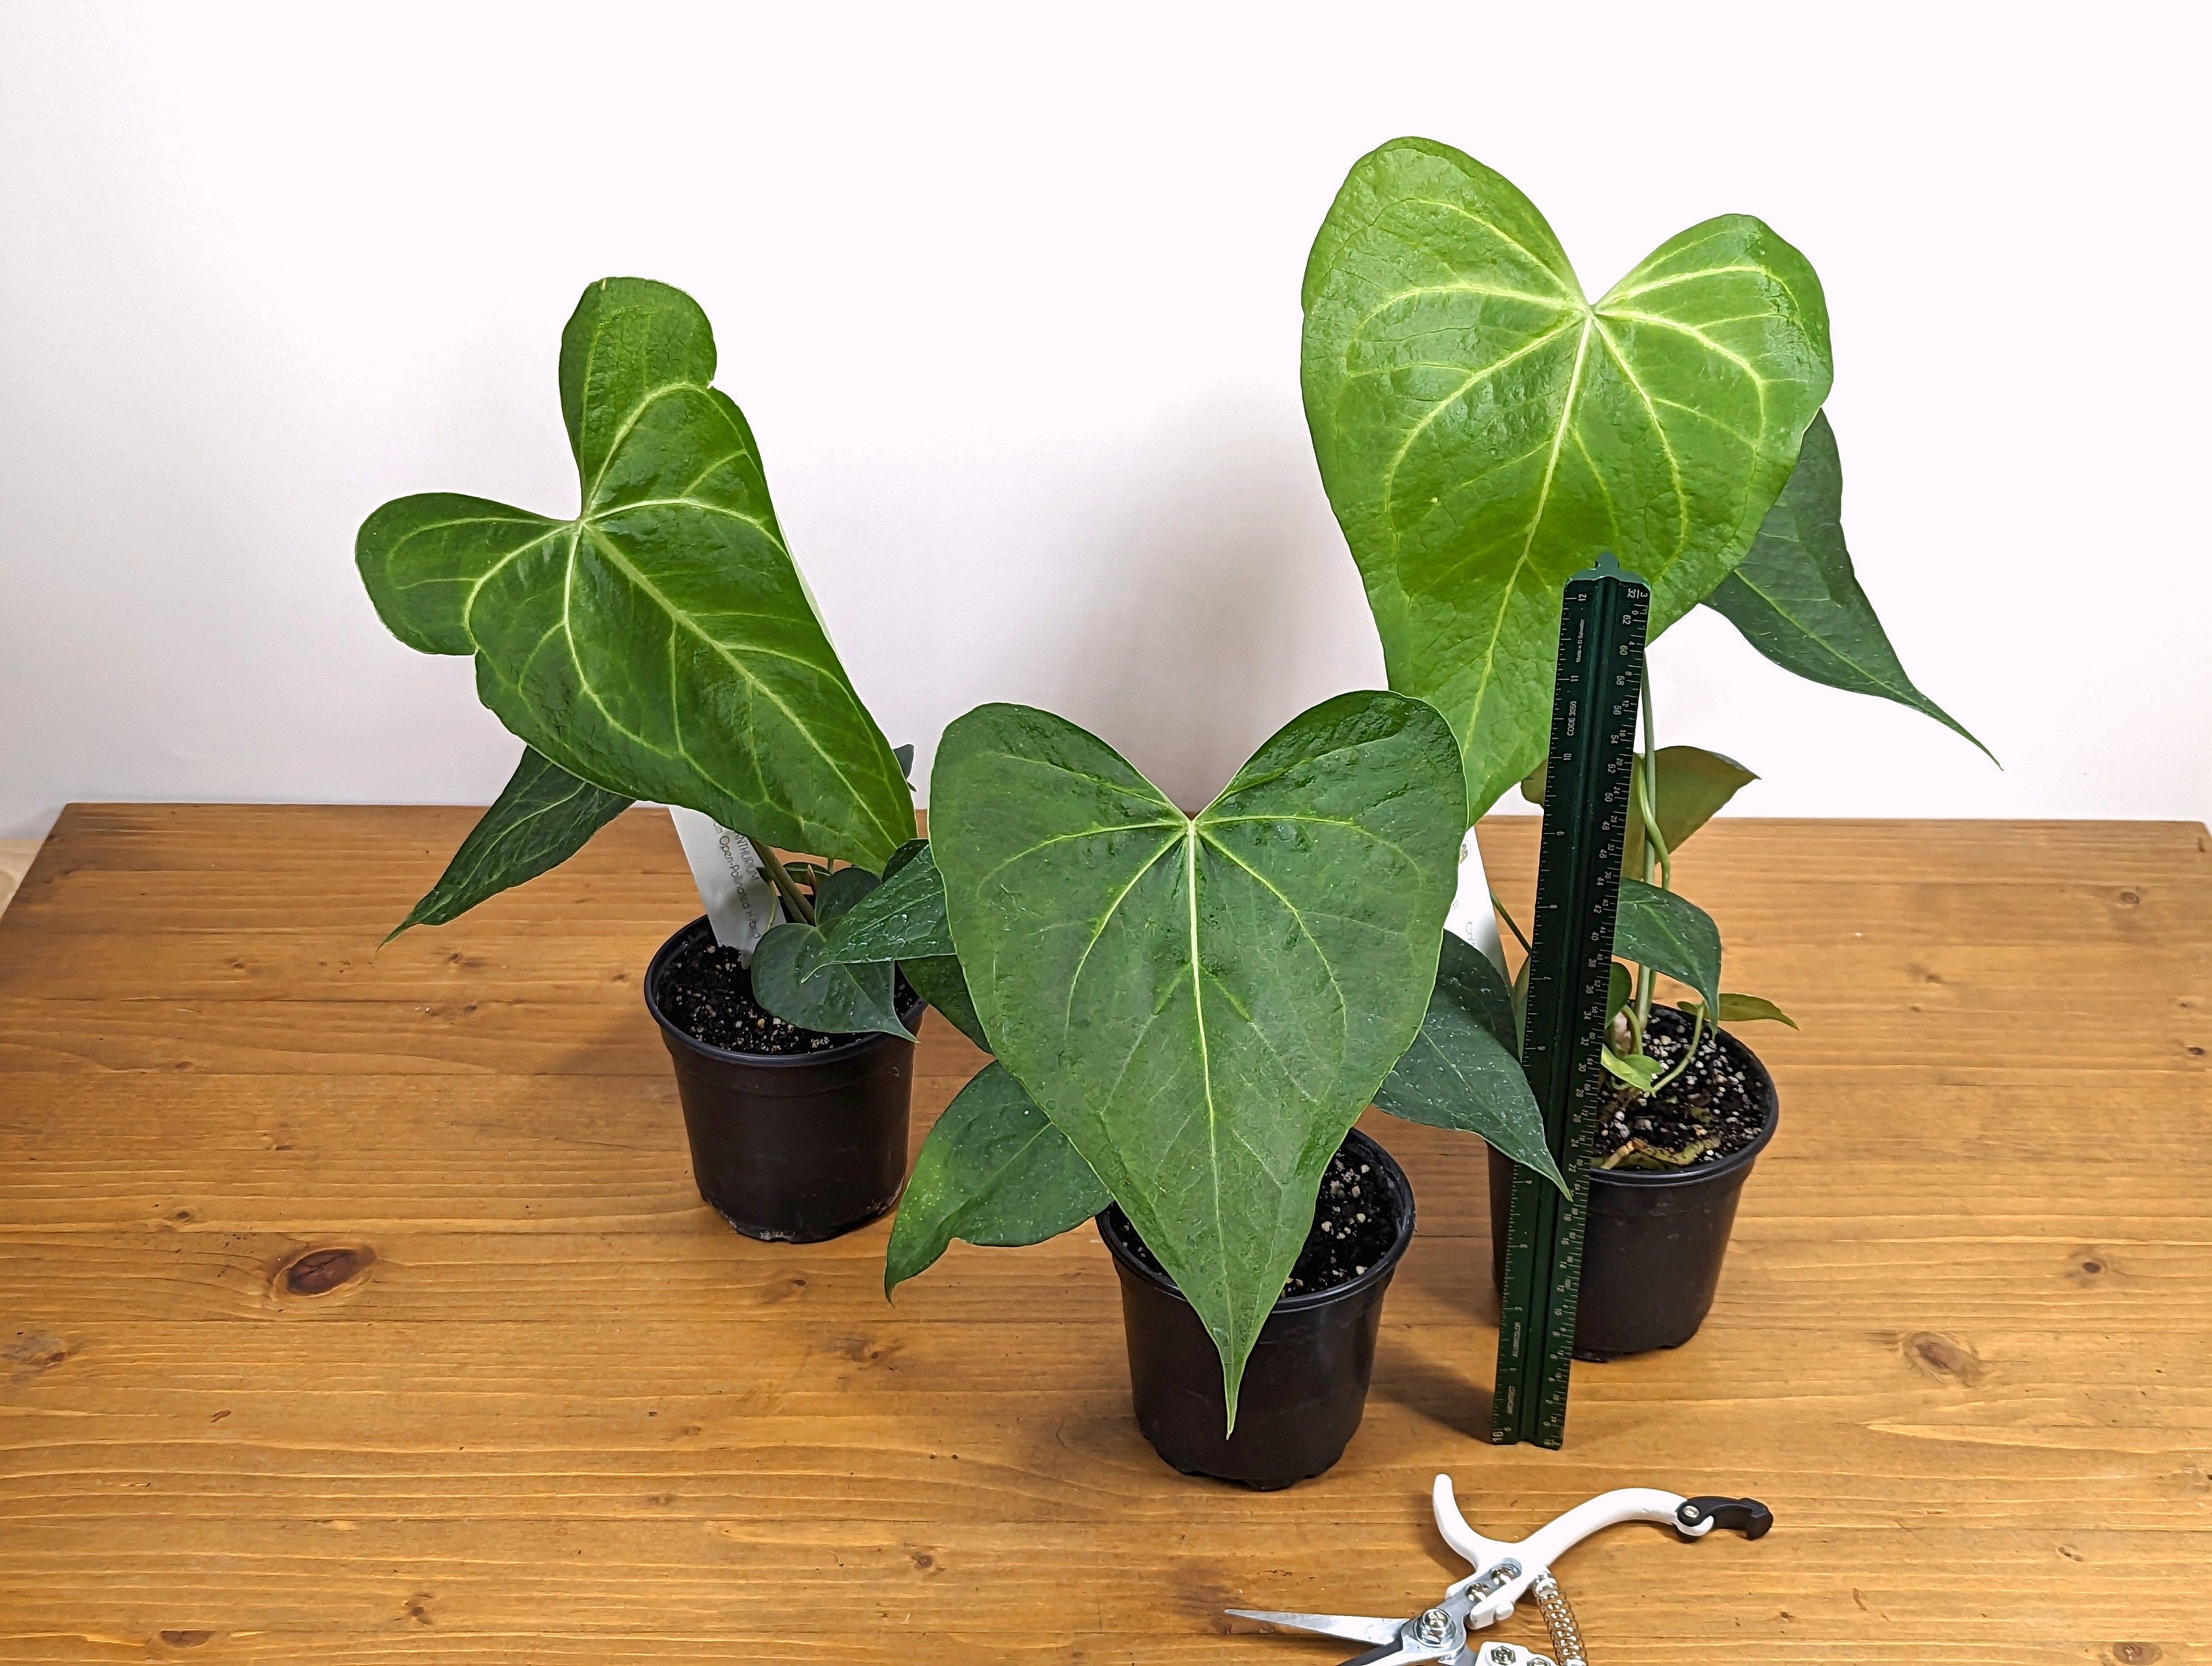 Large Anthurium clarinervium Open Pollinated Seed Grown - 4 Inch - Grower&